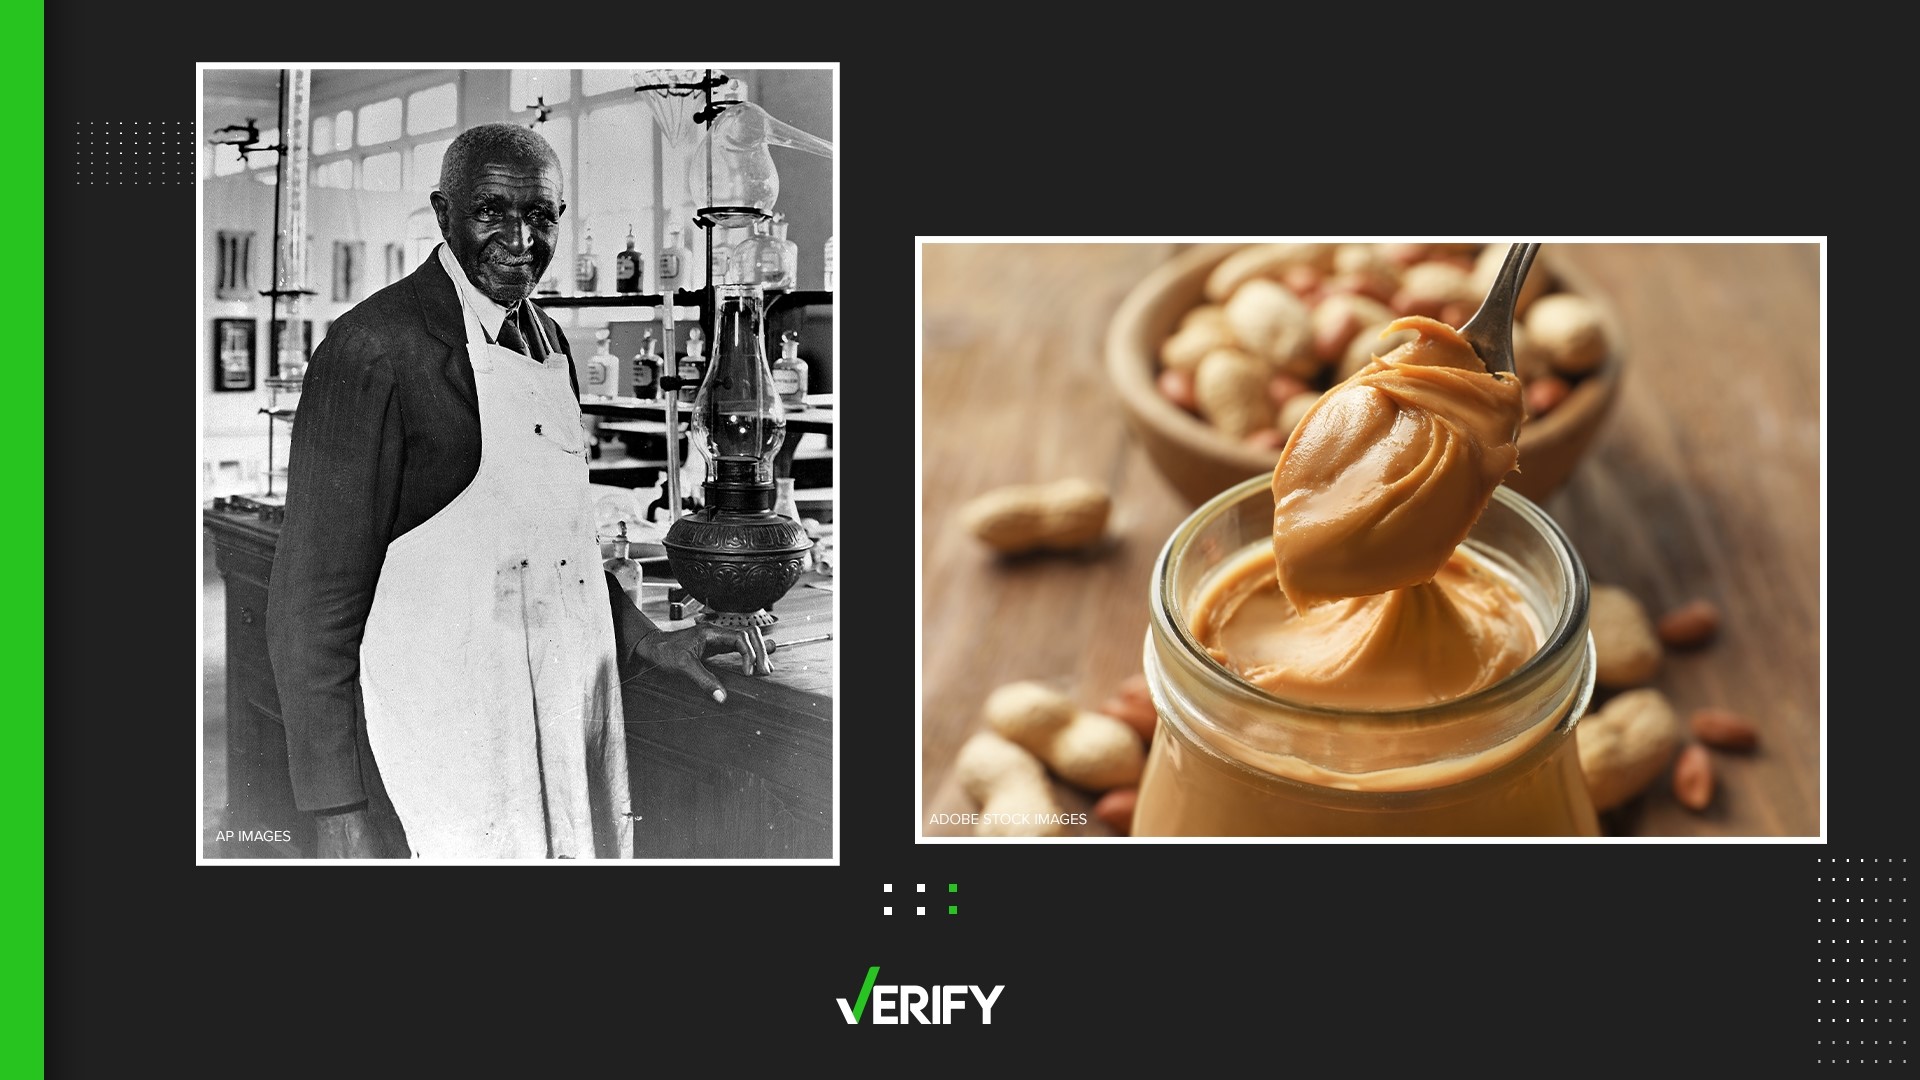 George Washington Carver, an agricultural scientist known as “The Peanut Man,” did not invent peanut butter, although he is often credited with creating it.